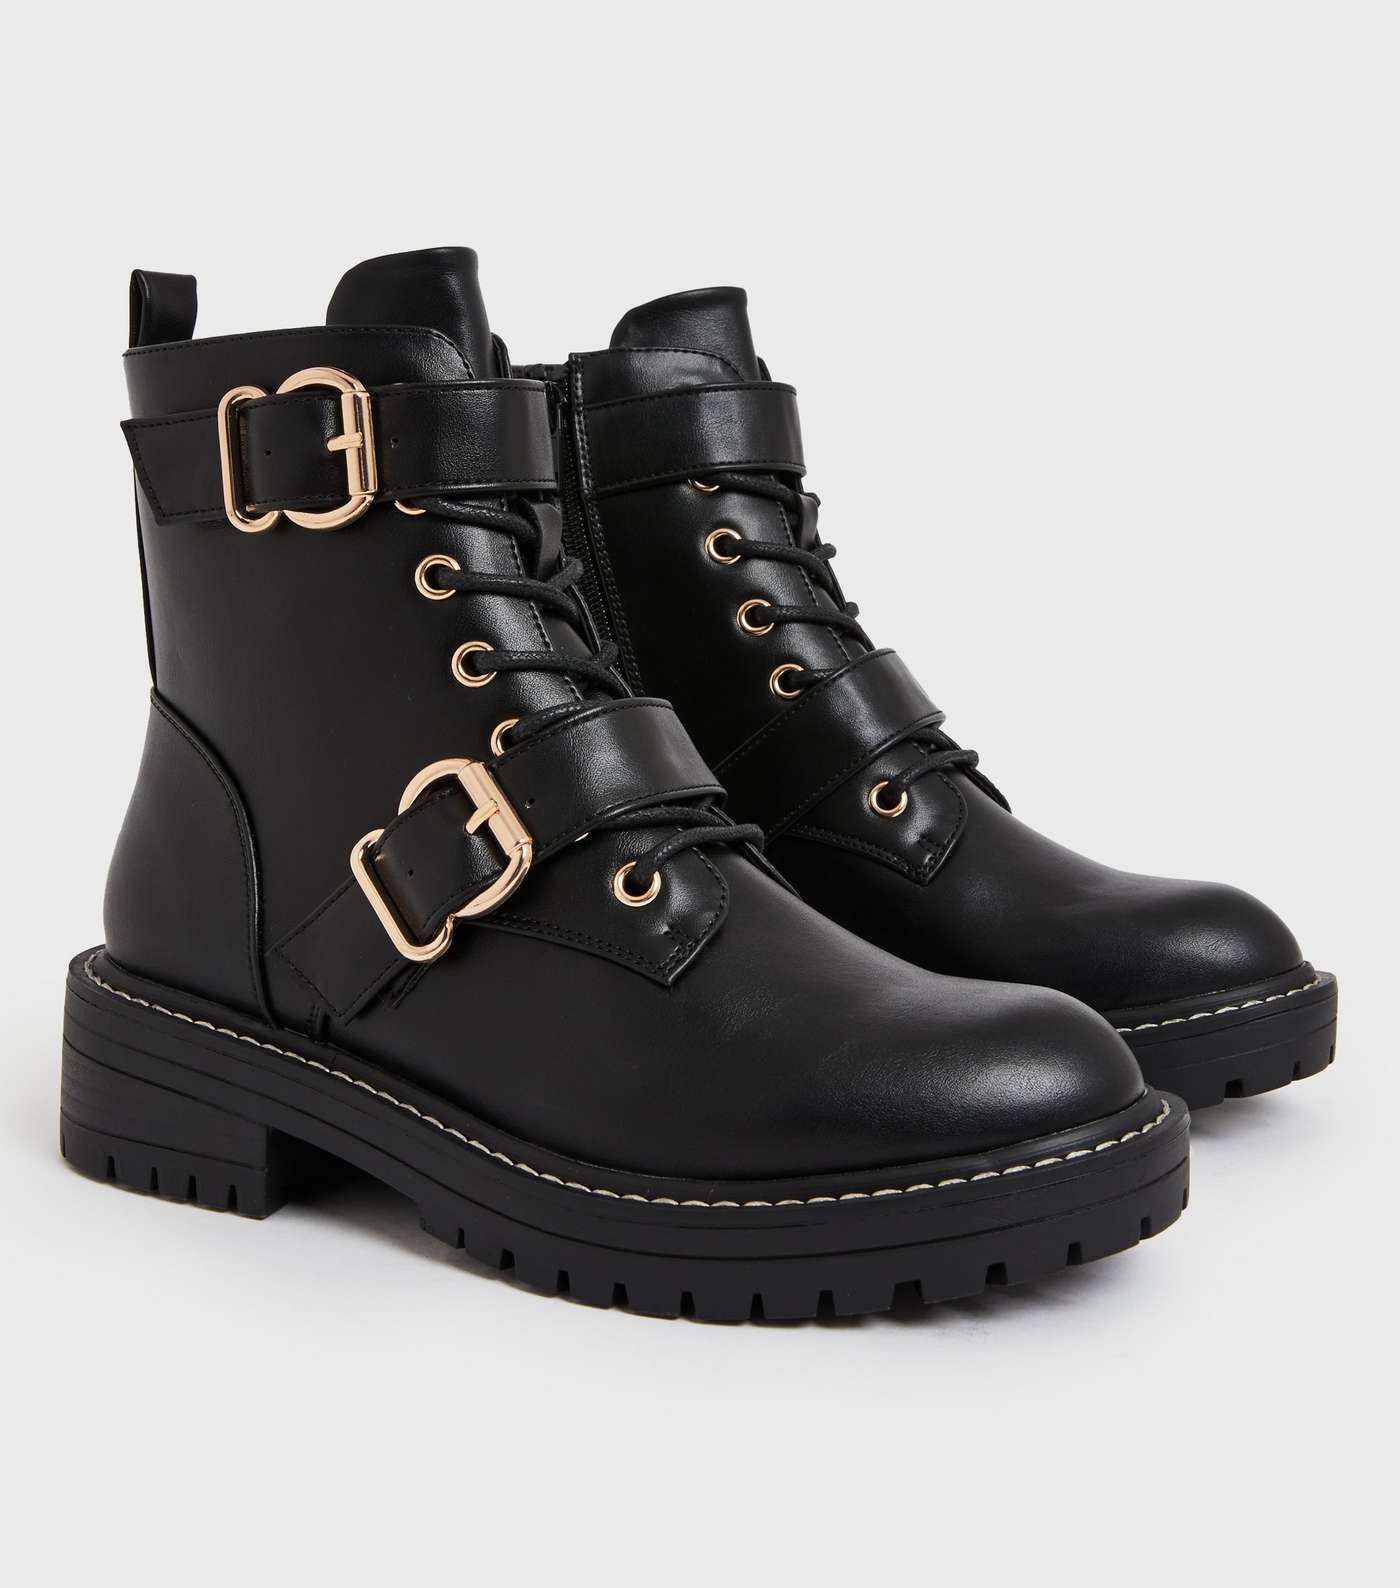 Girls Black Lace Up Buckle Chunky Biker Boots Image 3